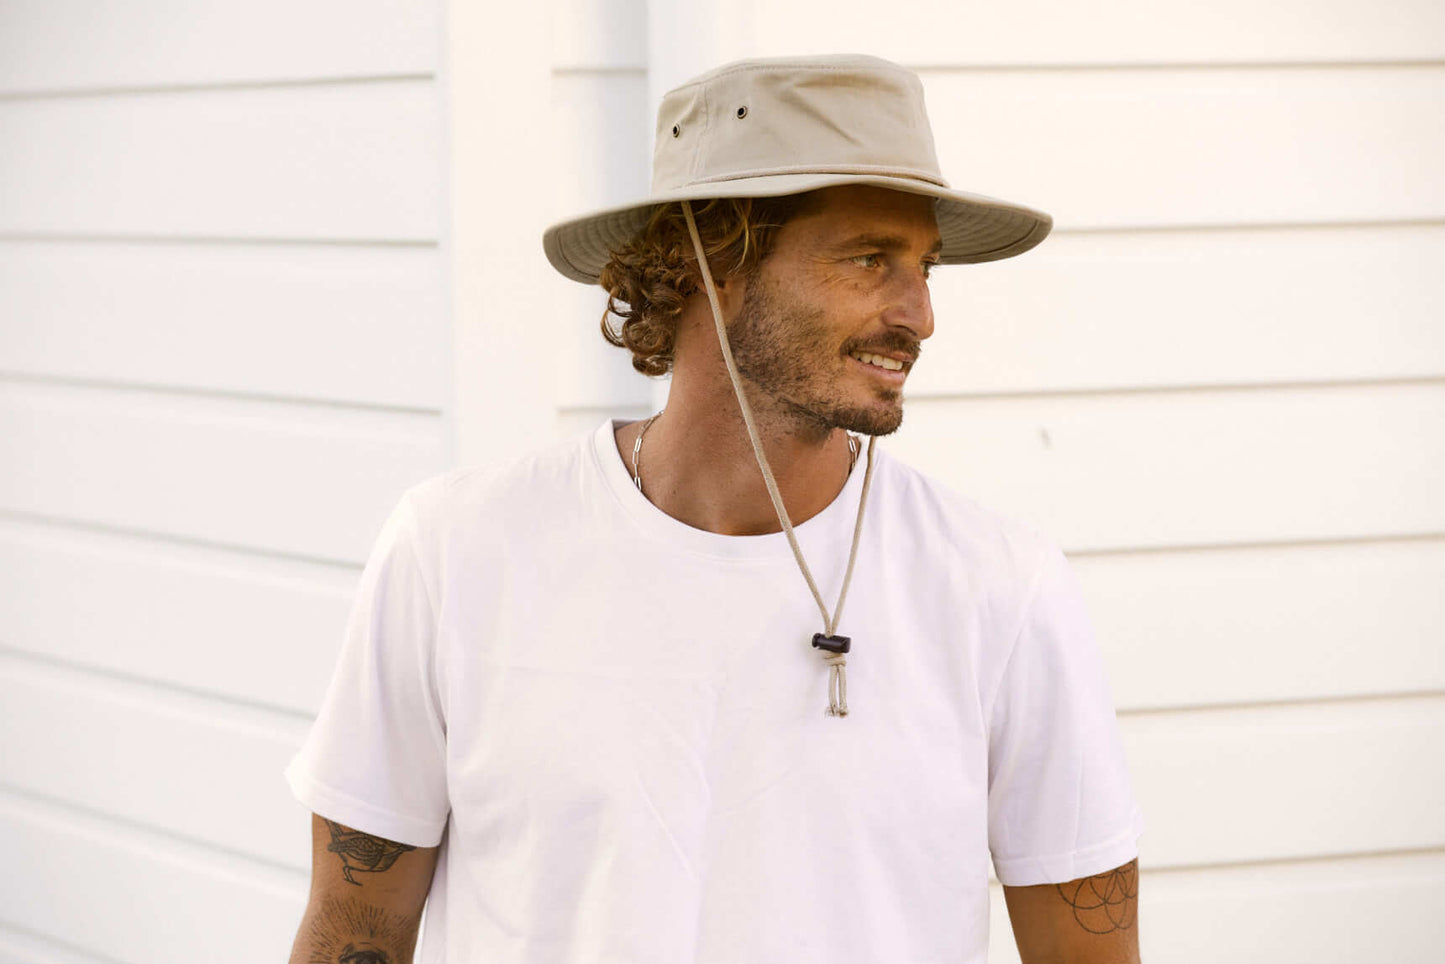 Man smiling in a Boonie bucket style hat made from organic cotton with wide sun protective brim and cotton chin cord